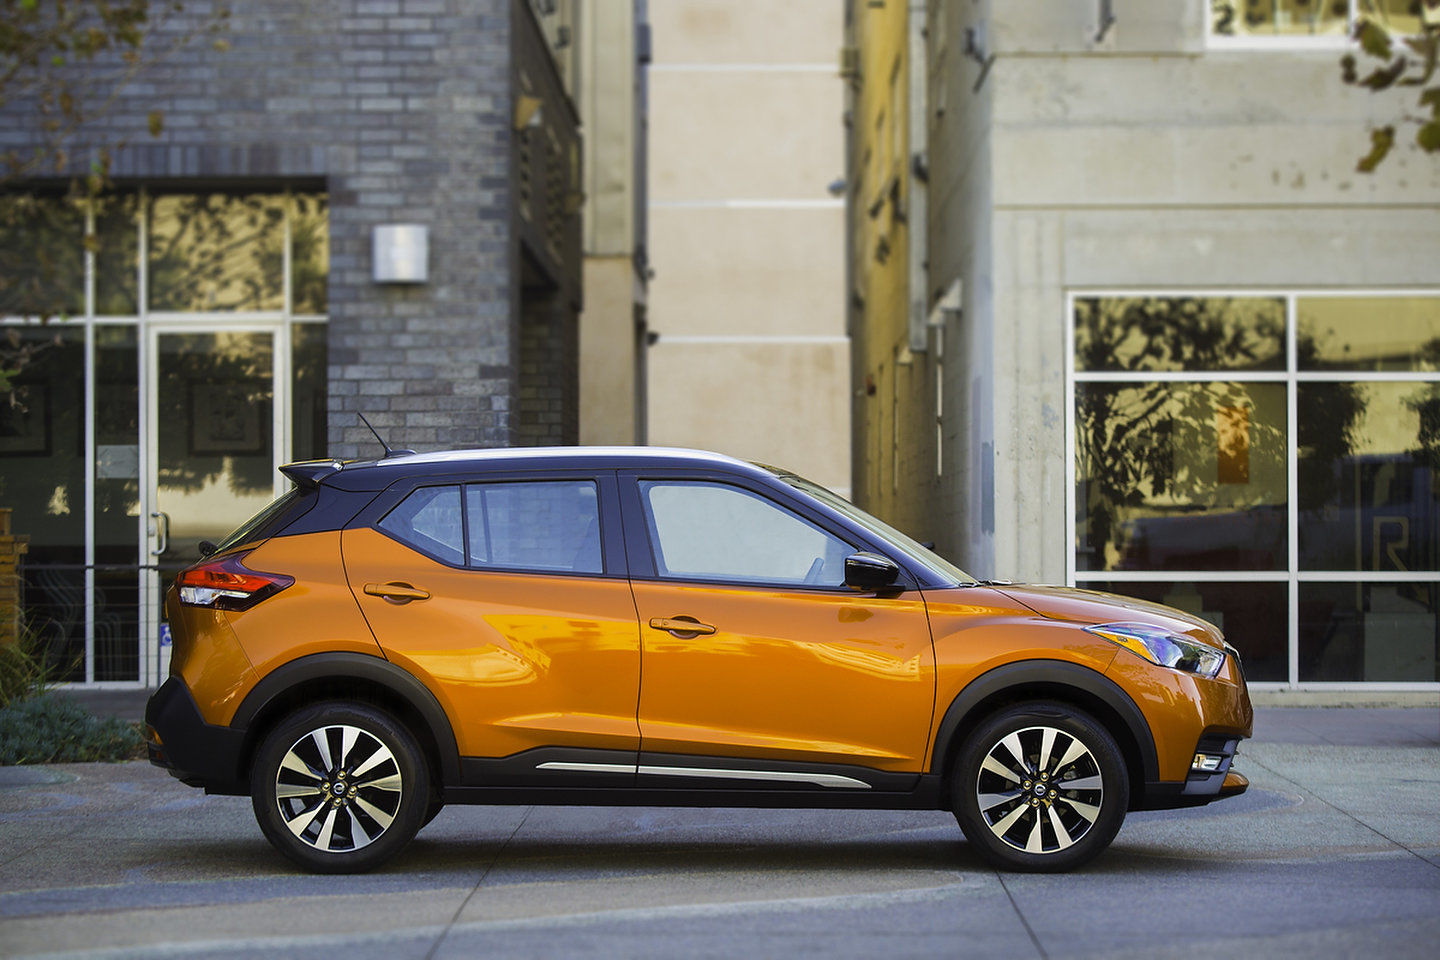 A look at new Nissan SUVS including the 2019 Nissan Kicks and 2019 Nissan Pathfinder